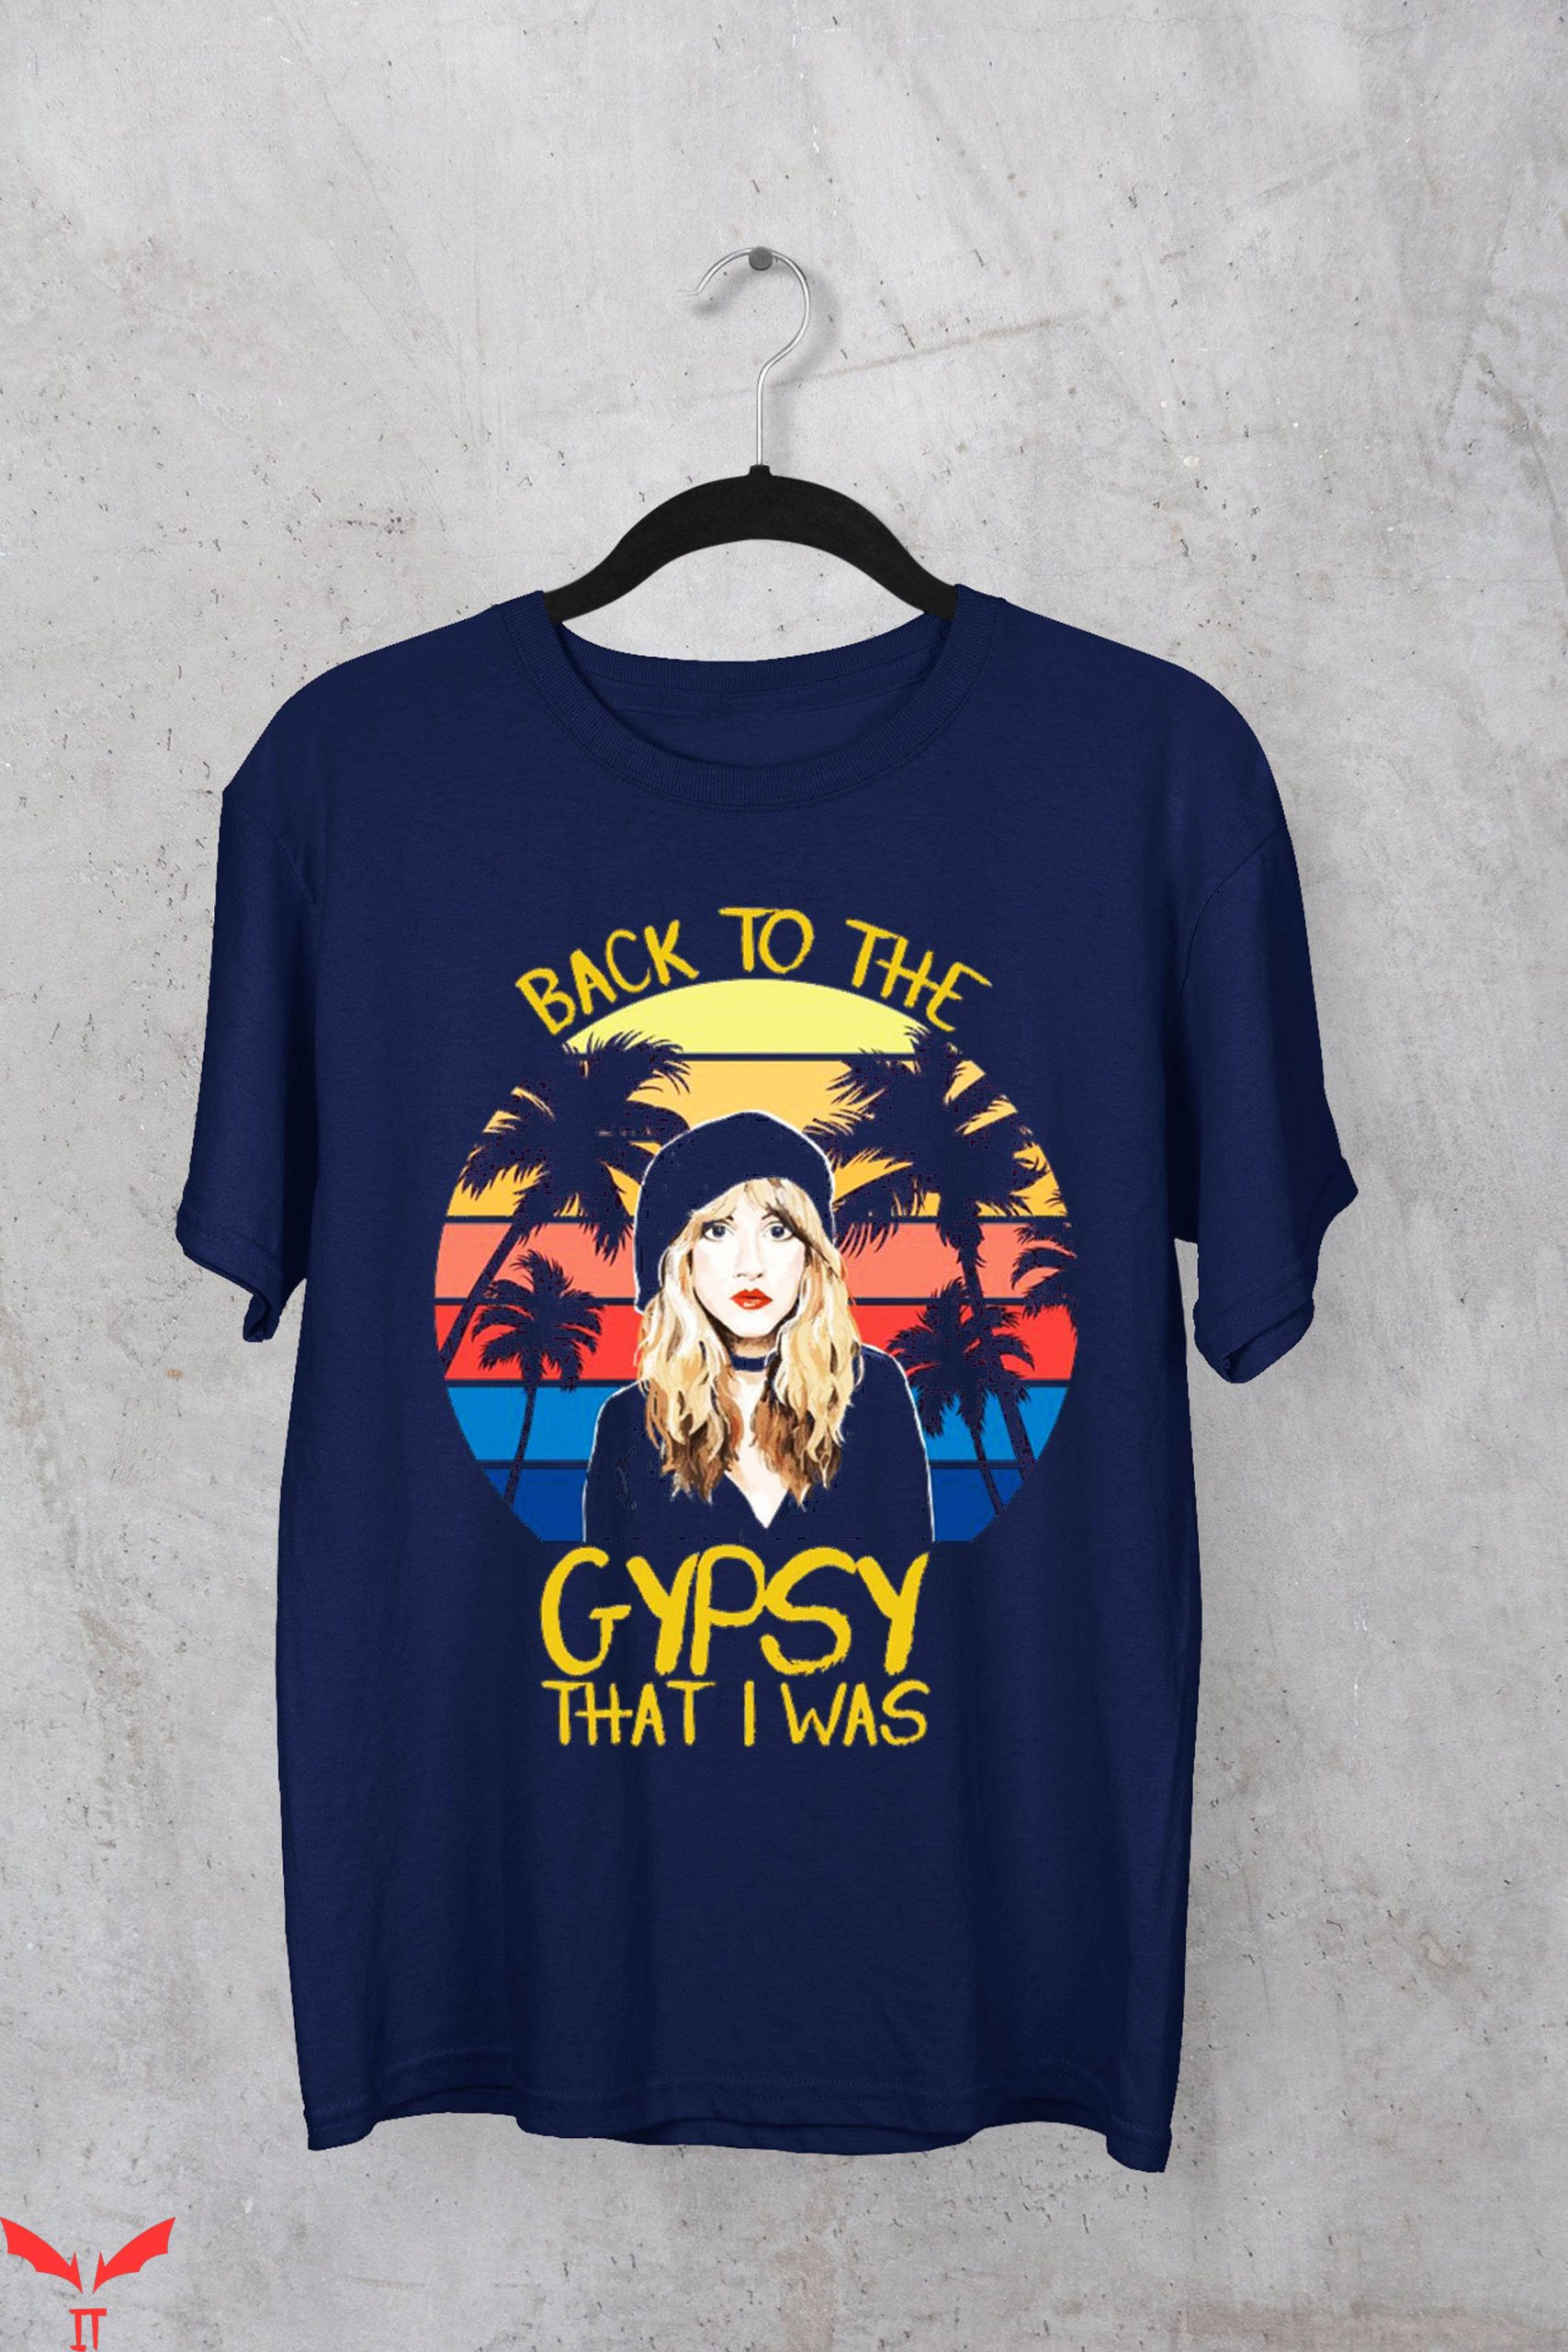 Back To The Gypsy That I Was T-Shirt Vintage Retro Tee Shirt